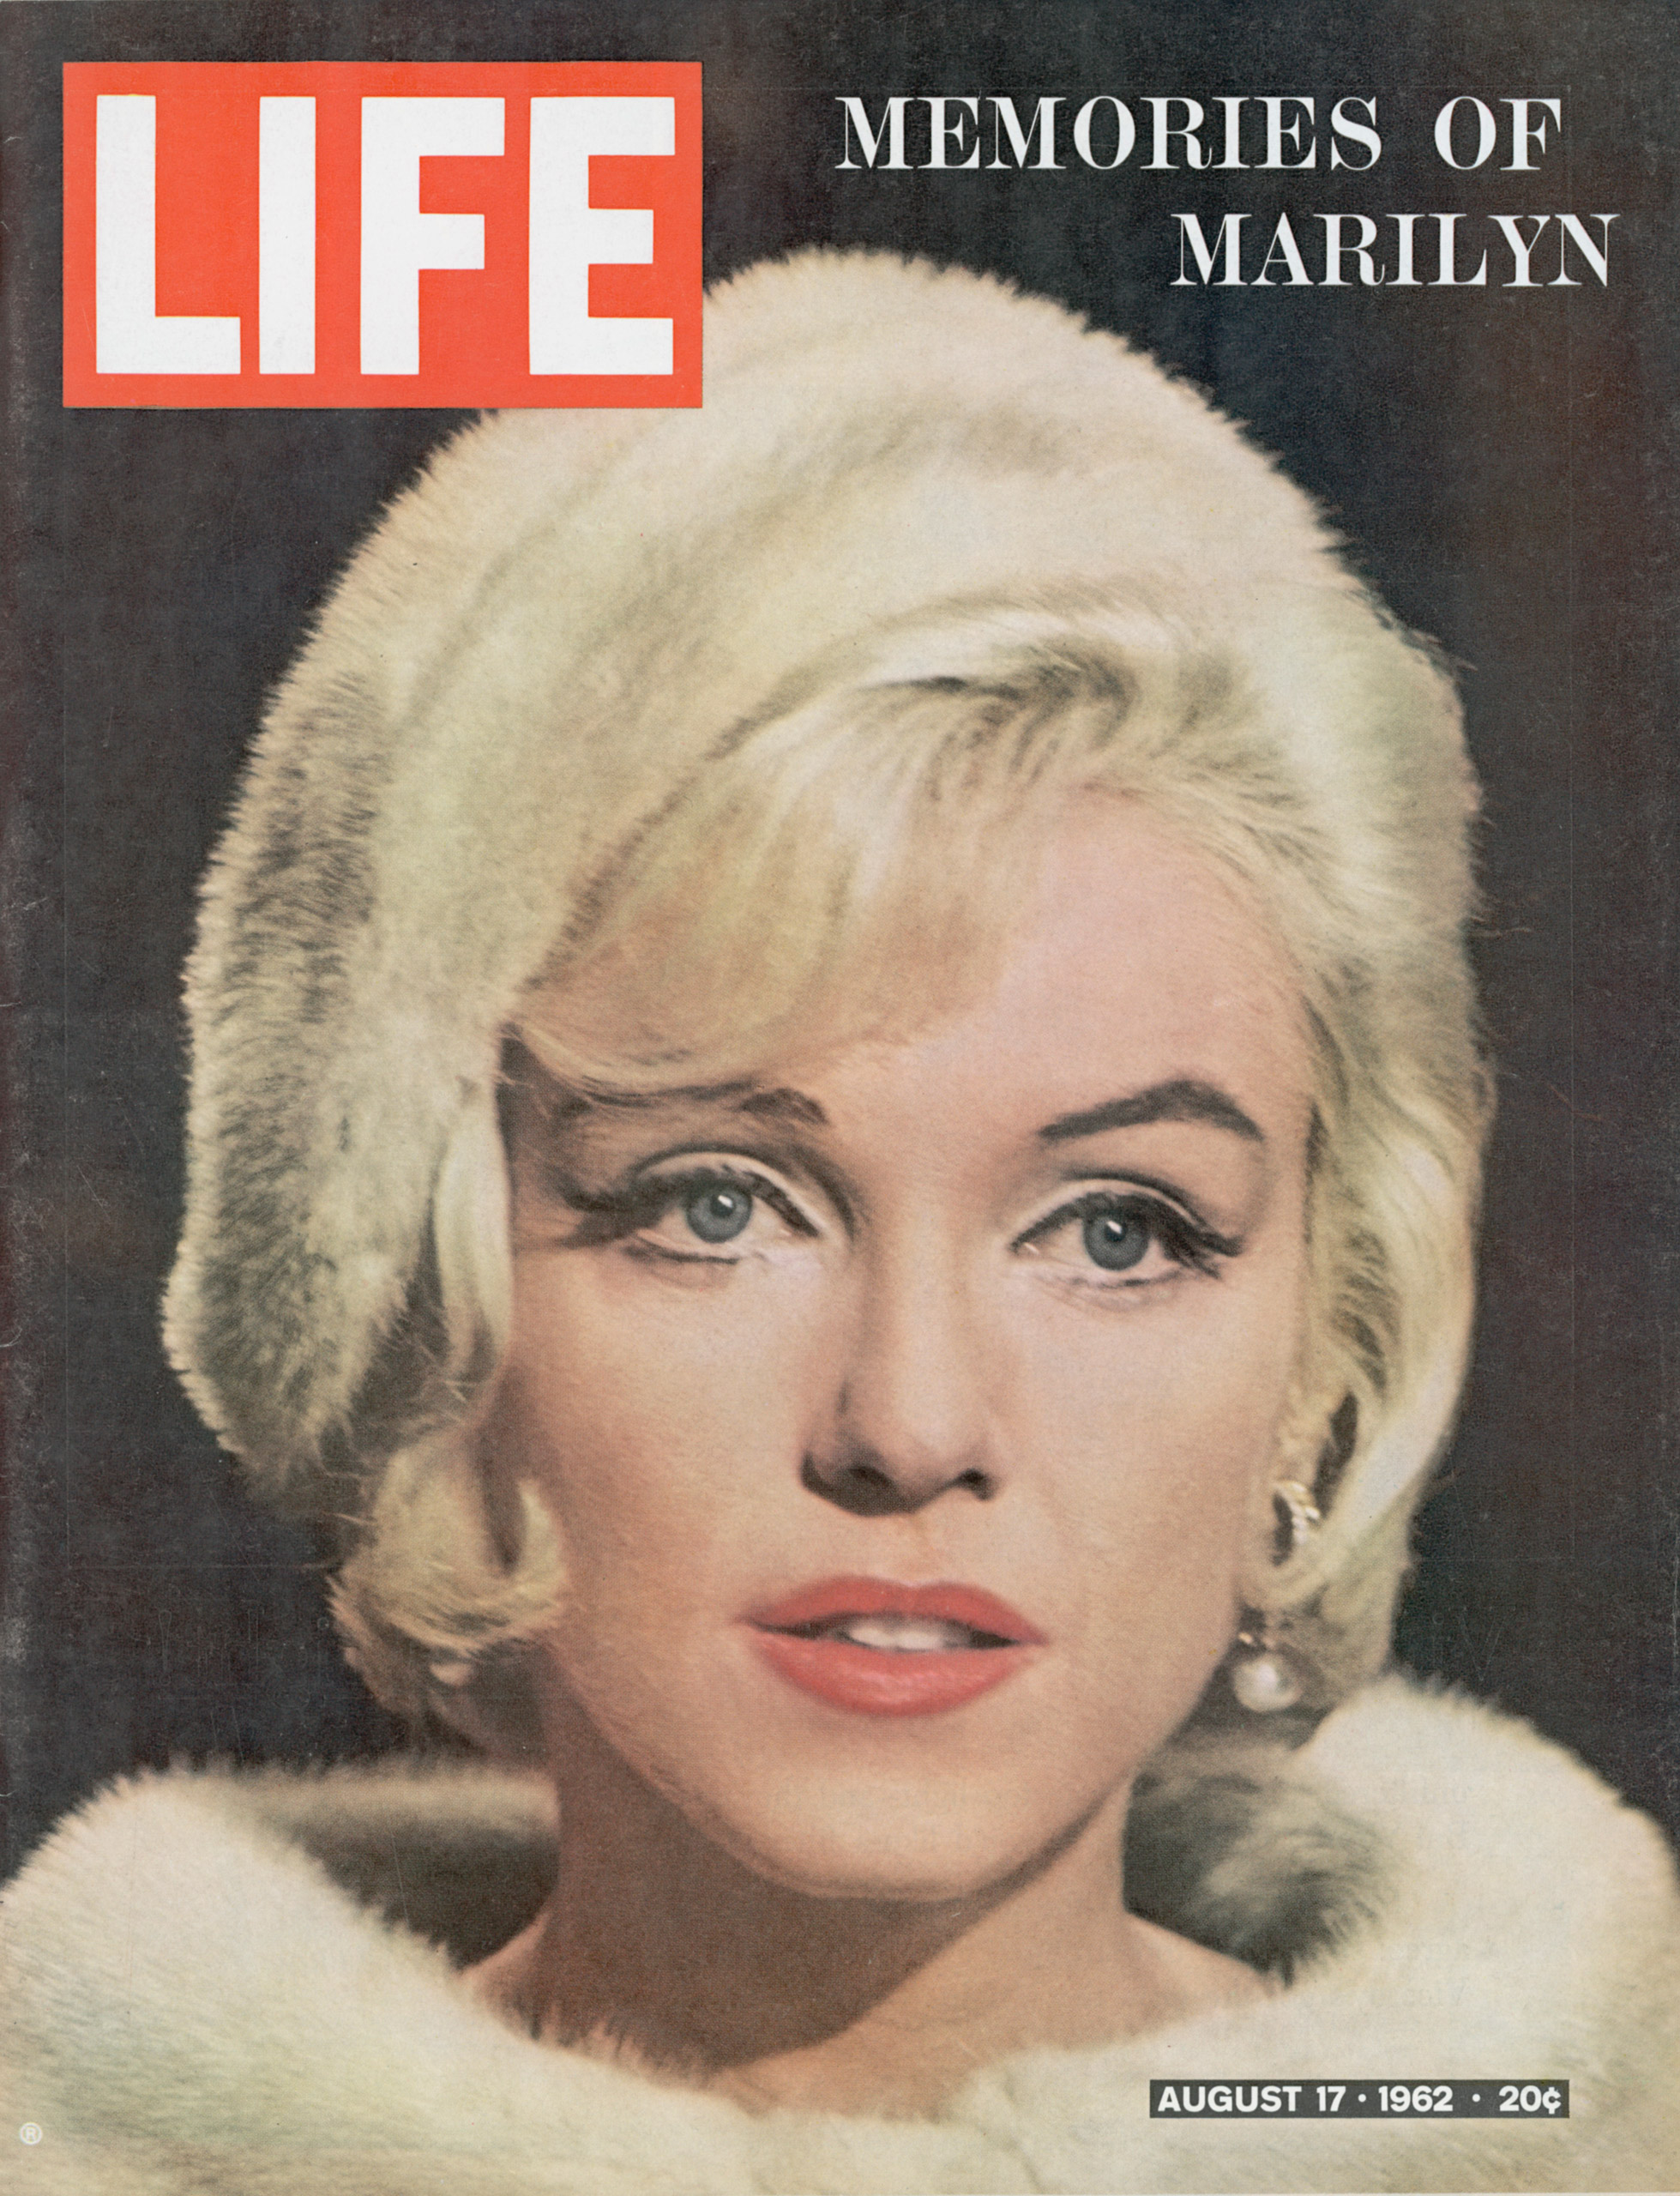 August 17, 1962 cover of LIFE magazine.